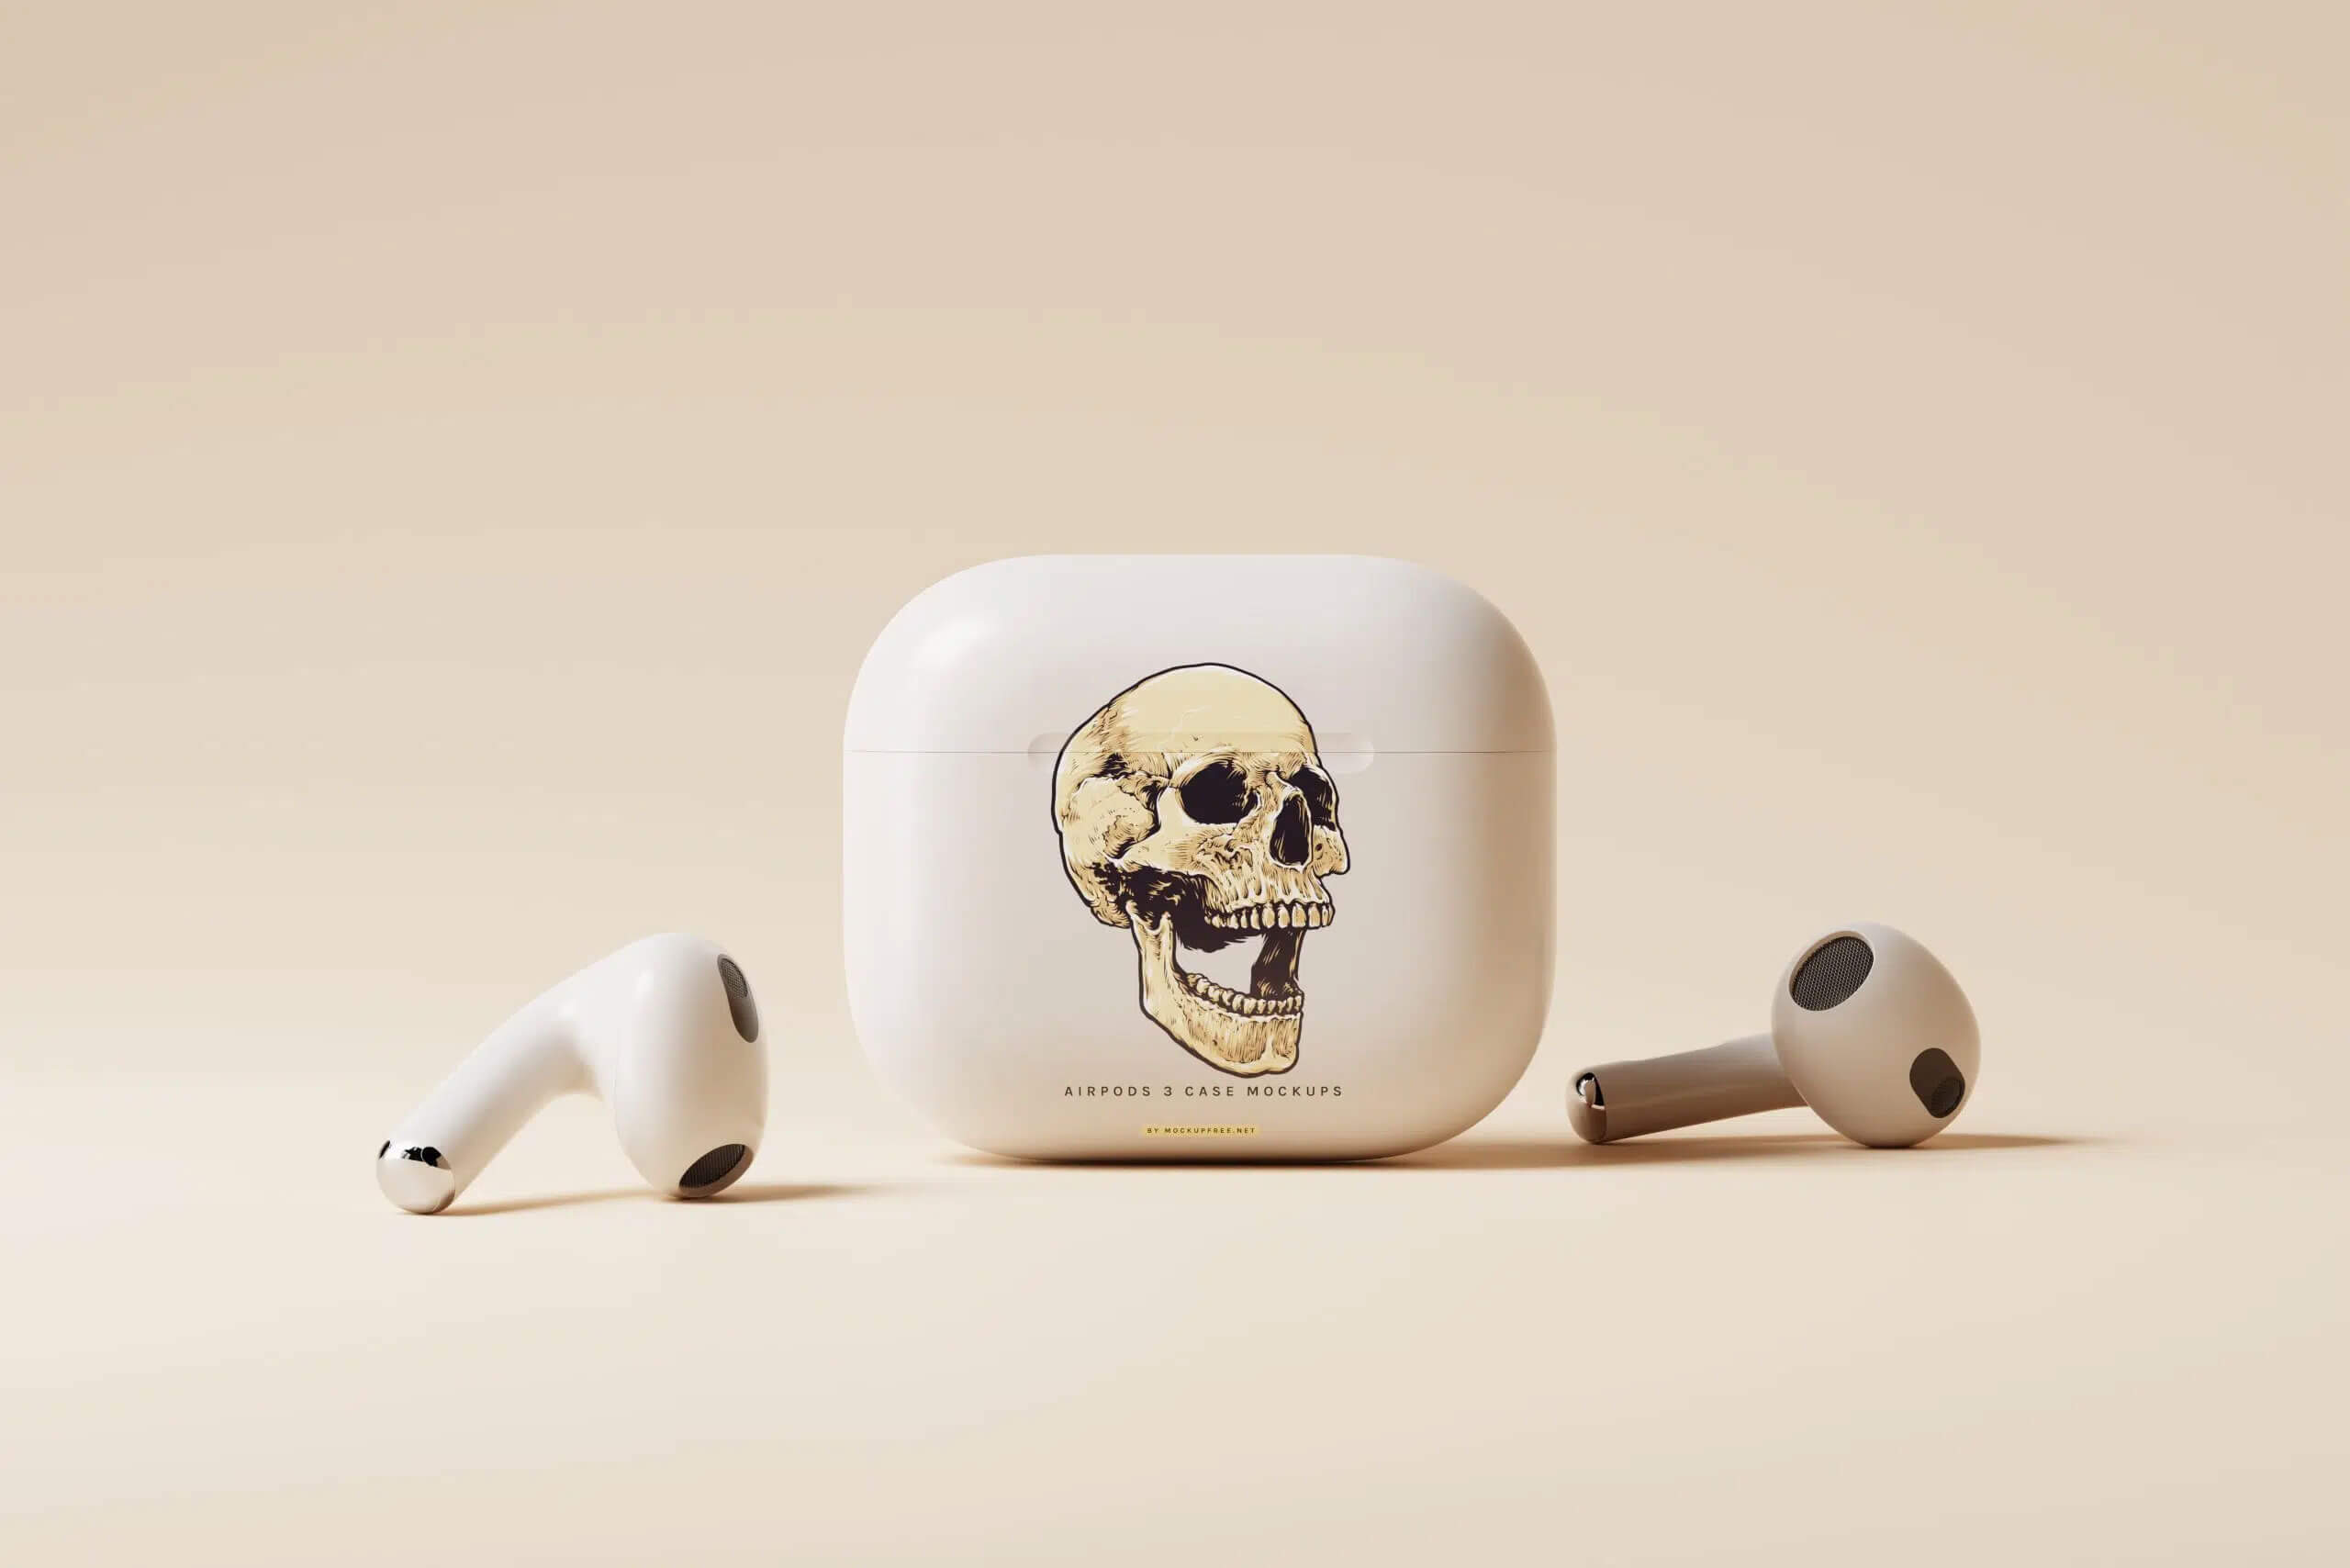 Apple Airpods 3 Case Mockups